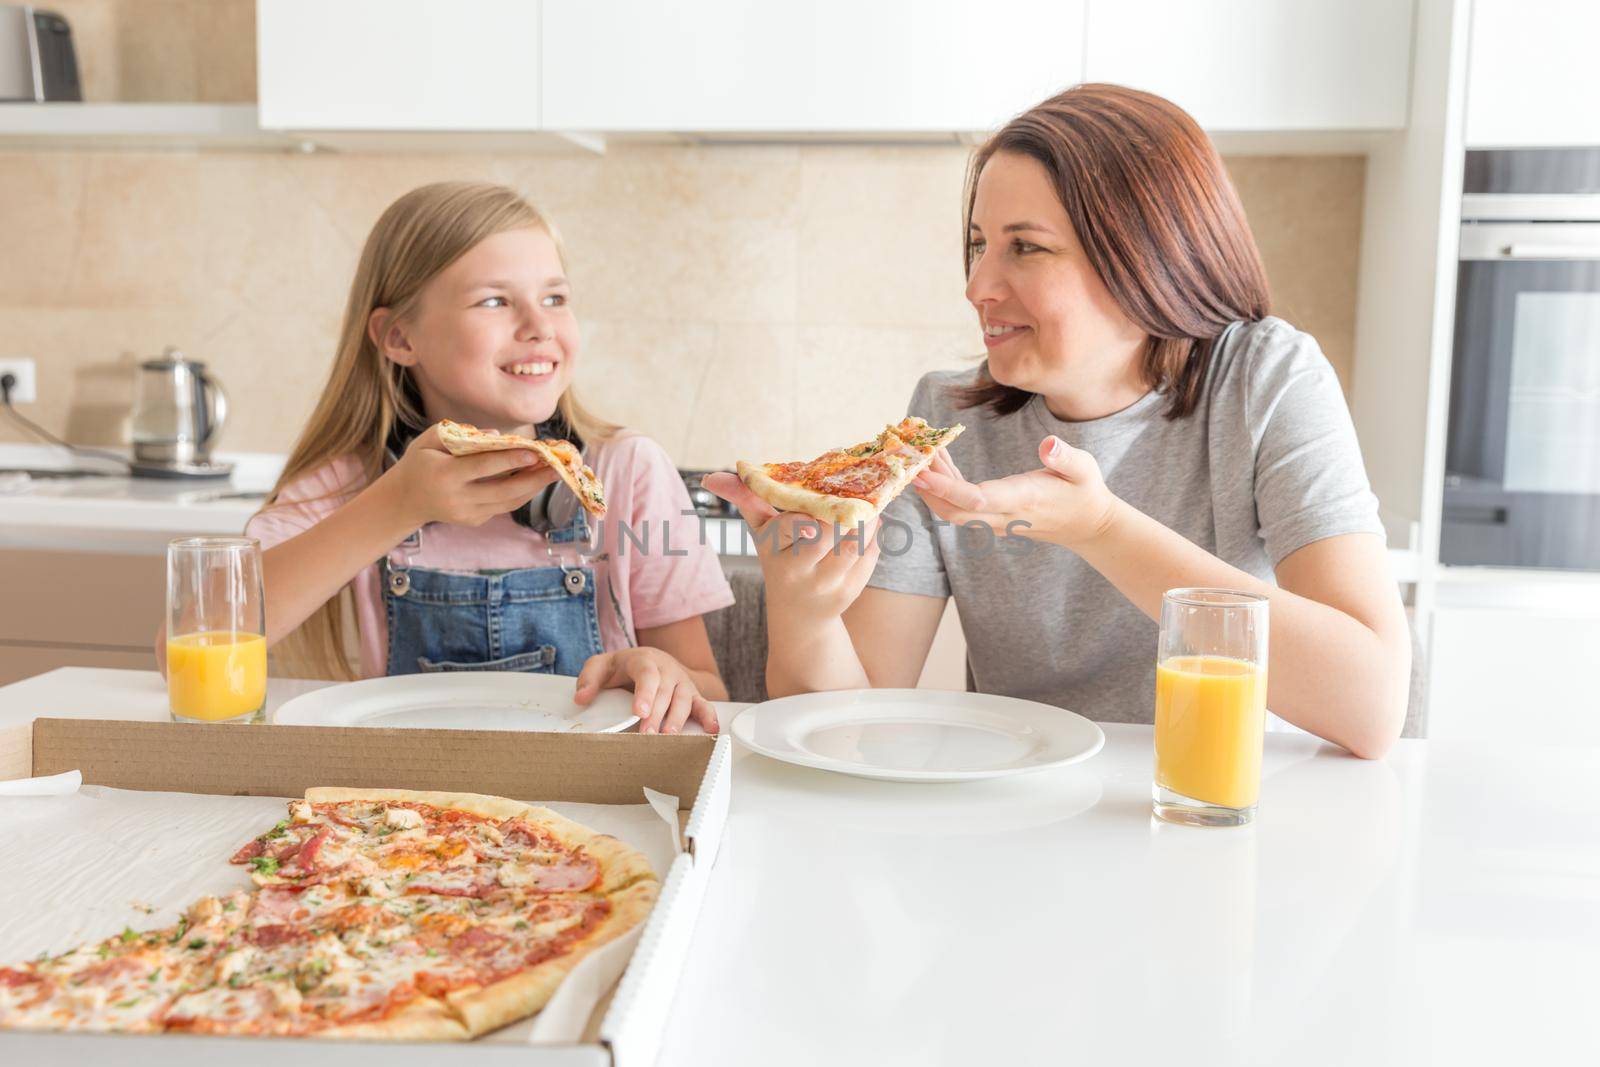 Mother and daughter sitting in the kitchen, eating pizza and having fun. Focus on the daughter